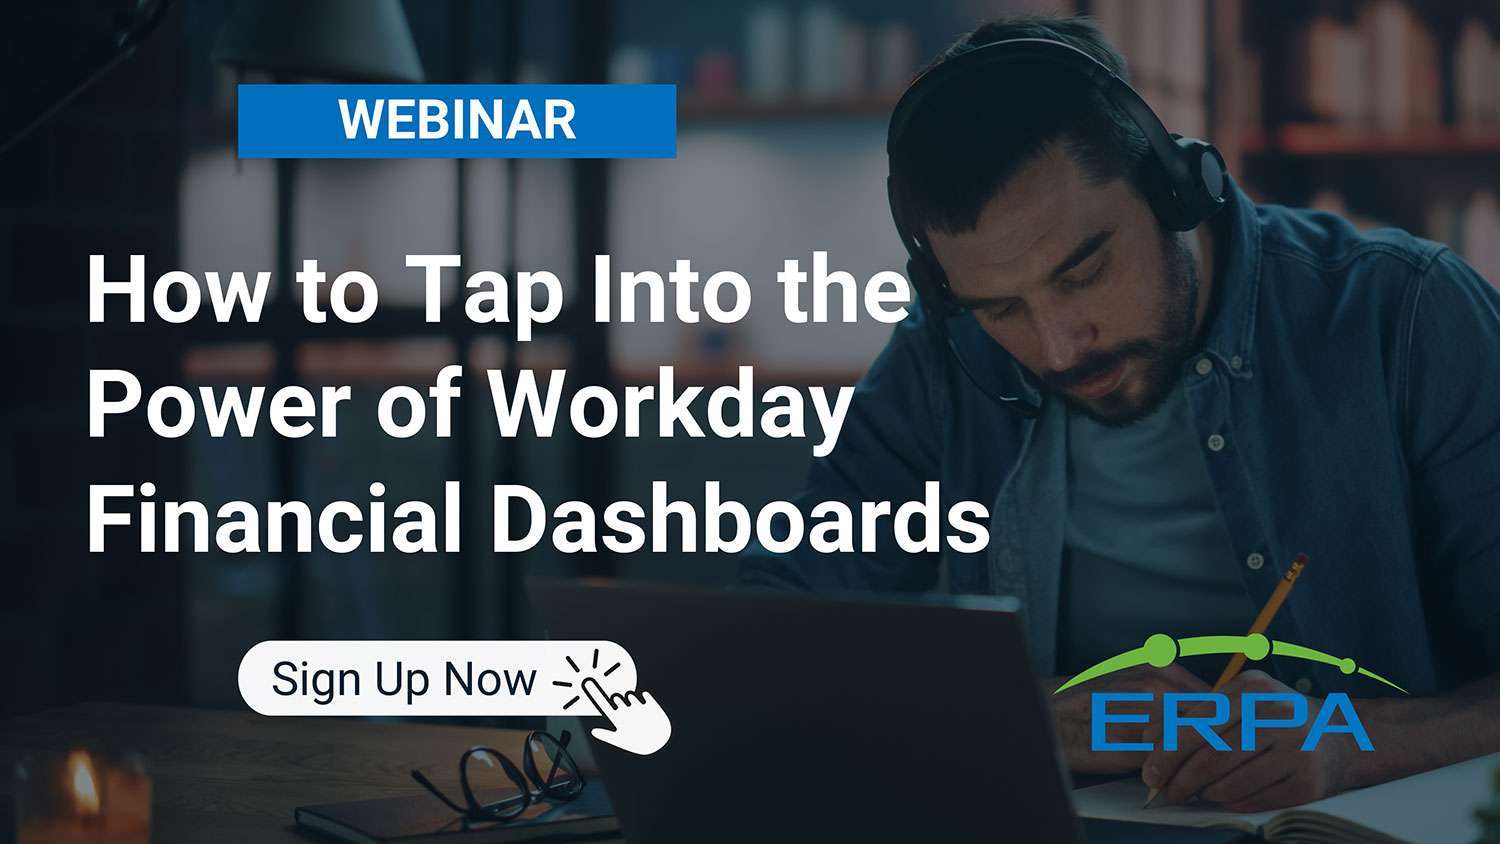 ERPA Webinar: How to Tap Into the Power of Workday Financials Dashboards